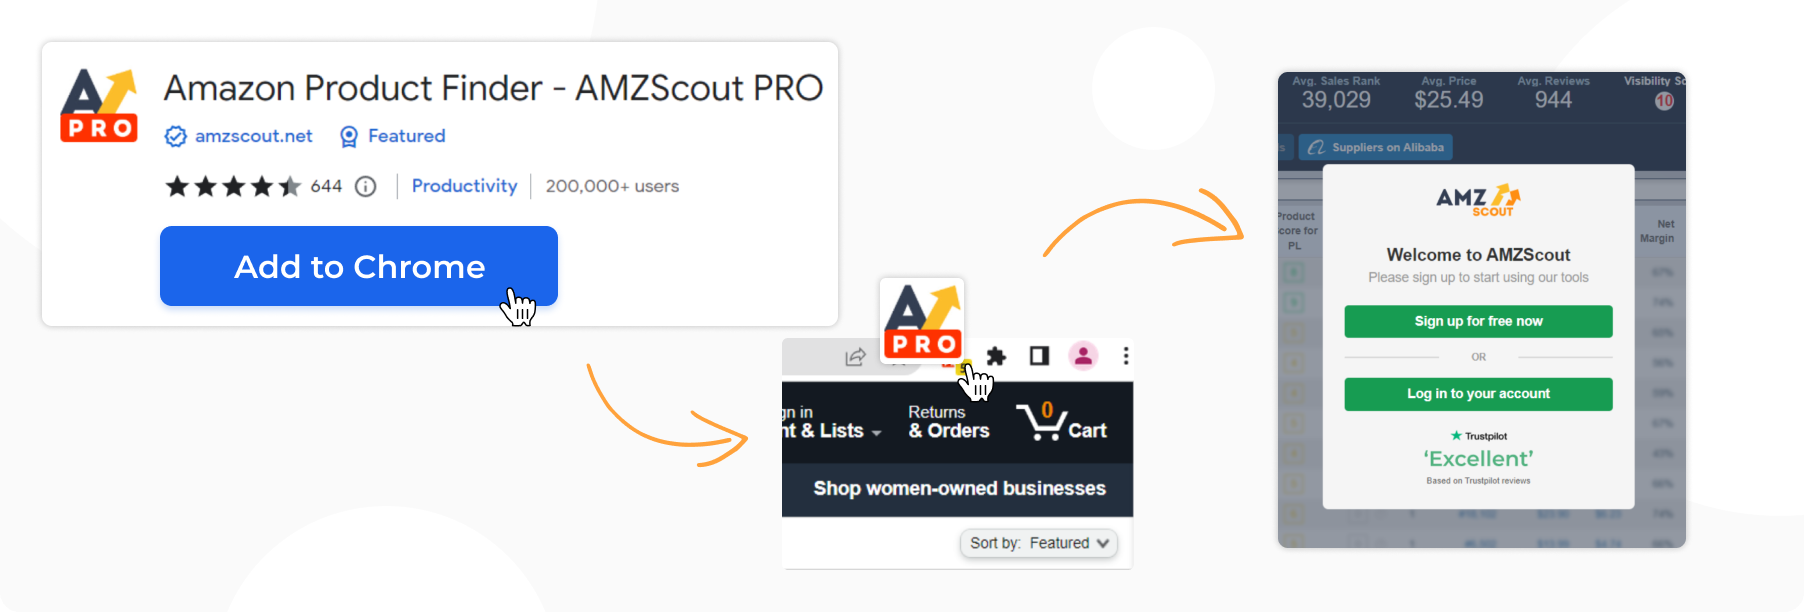 How to install and open AMZScout PRO